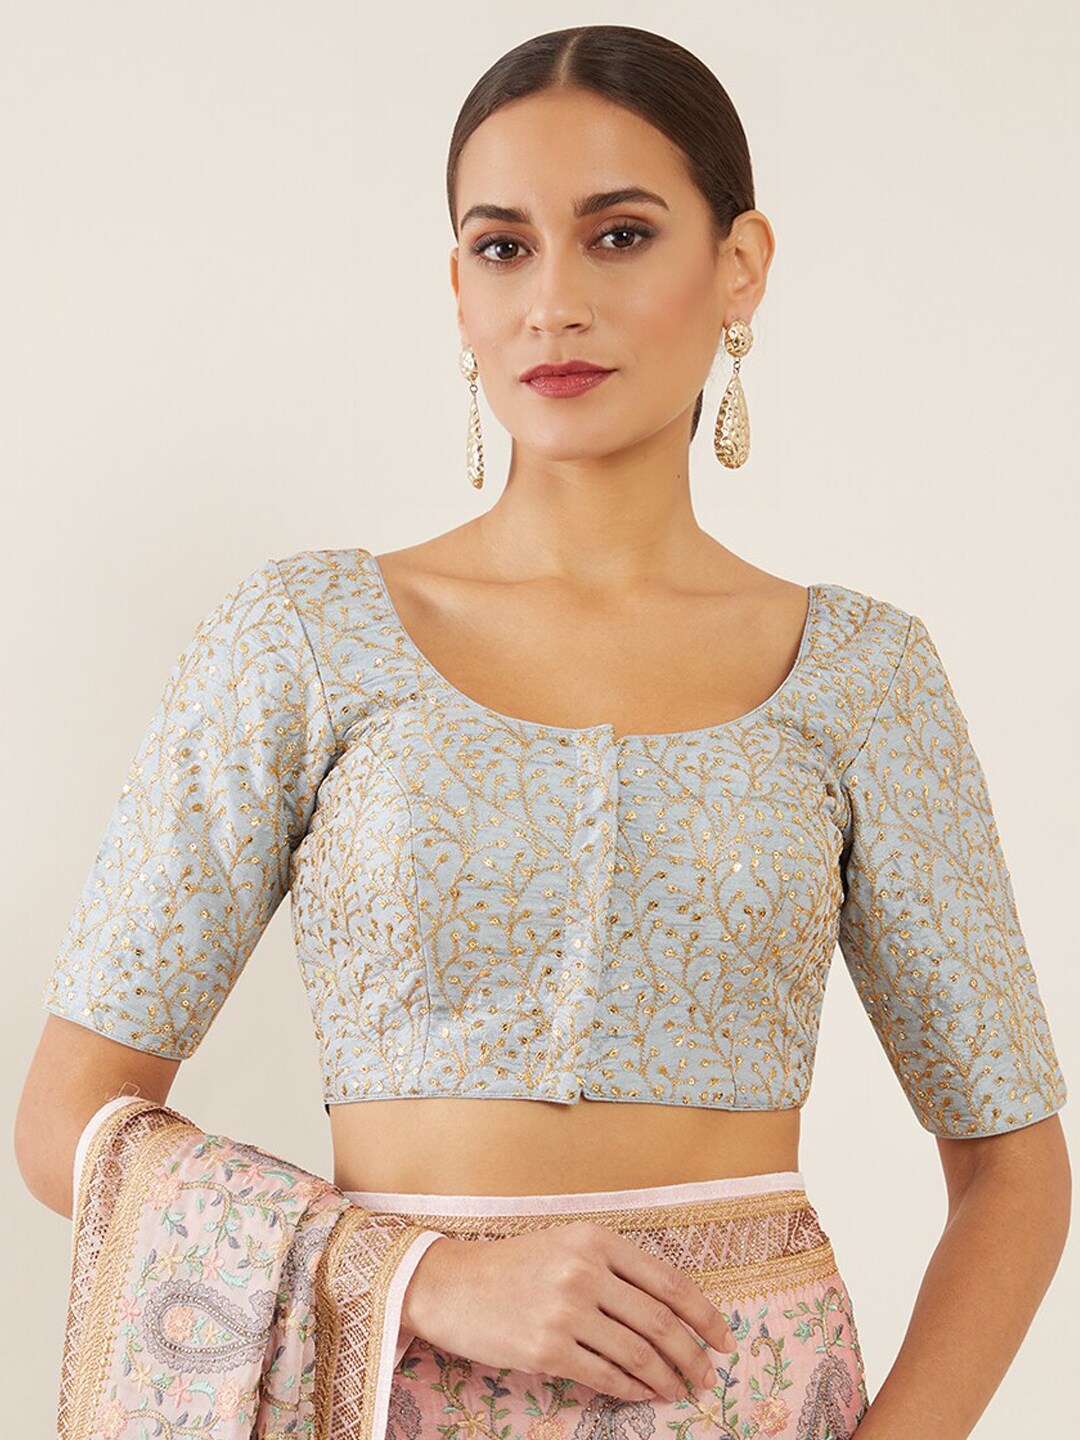 Soch Women Grey & Gold-Coloured Embroidered Saree Blouse Price in India